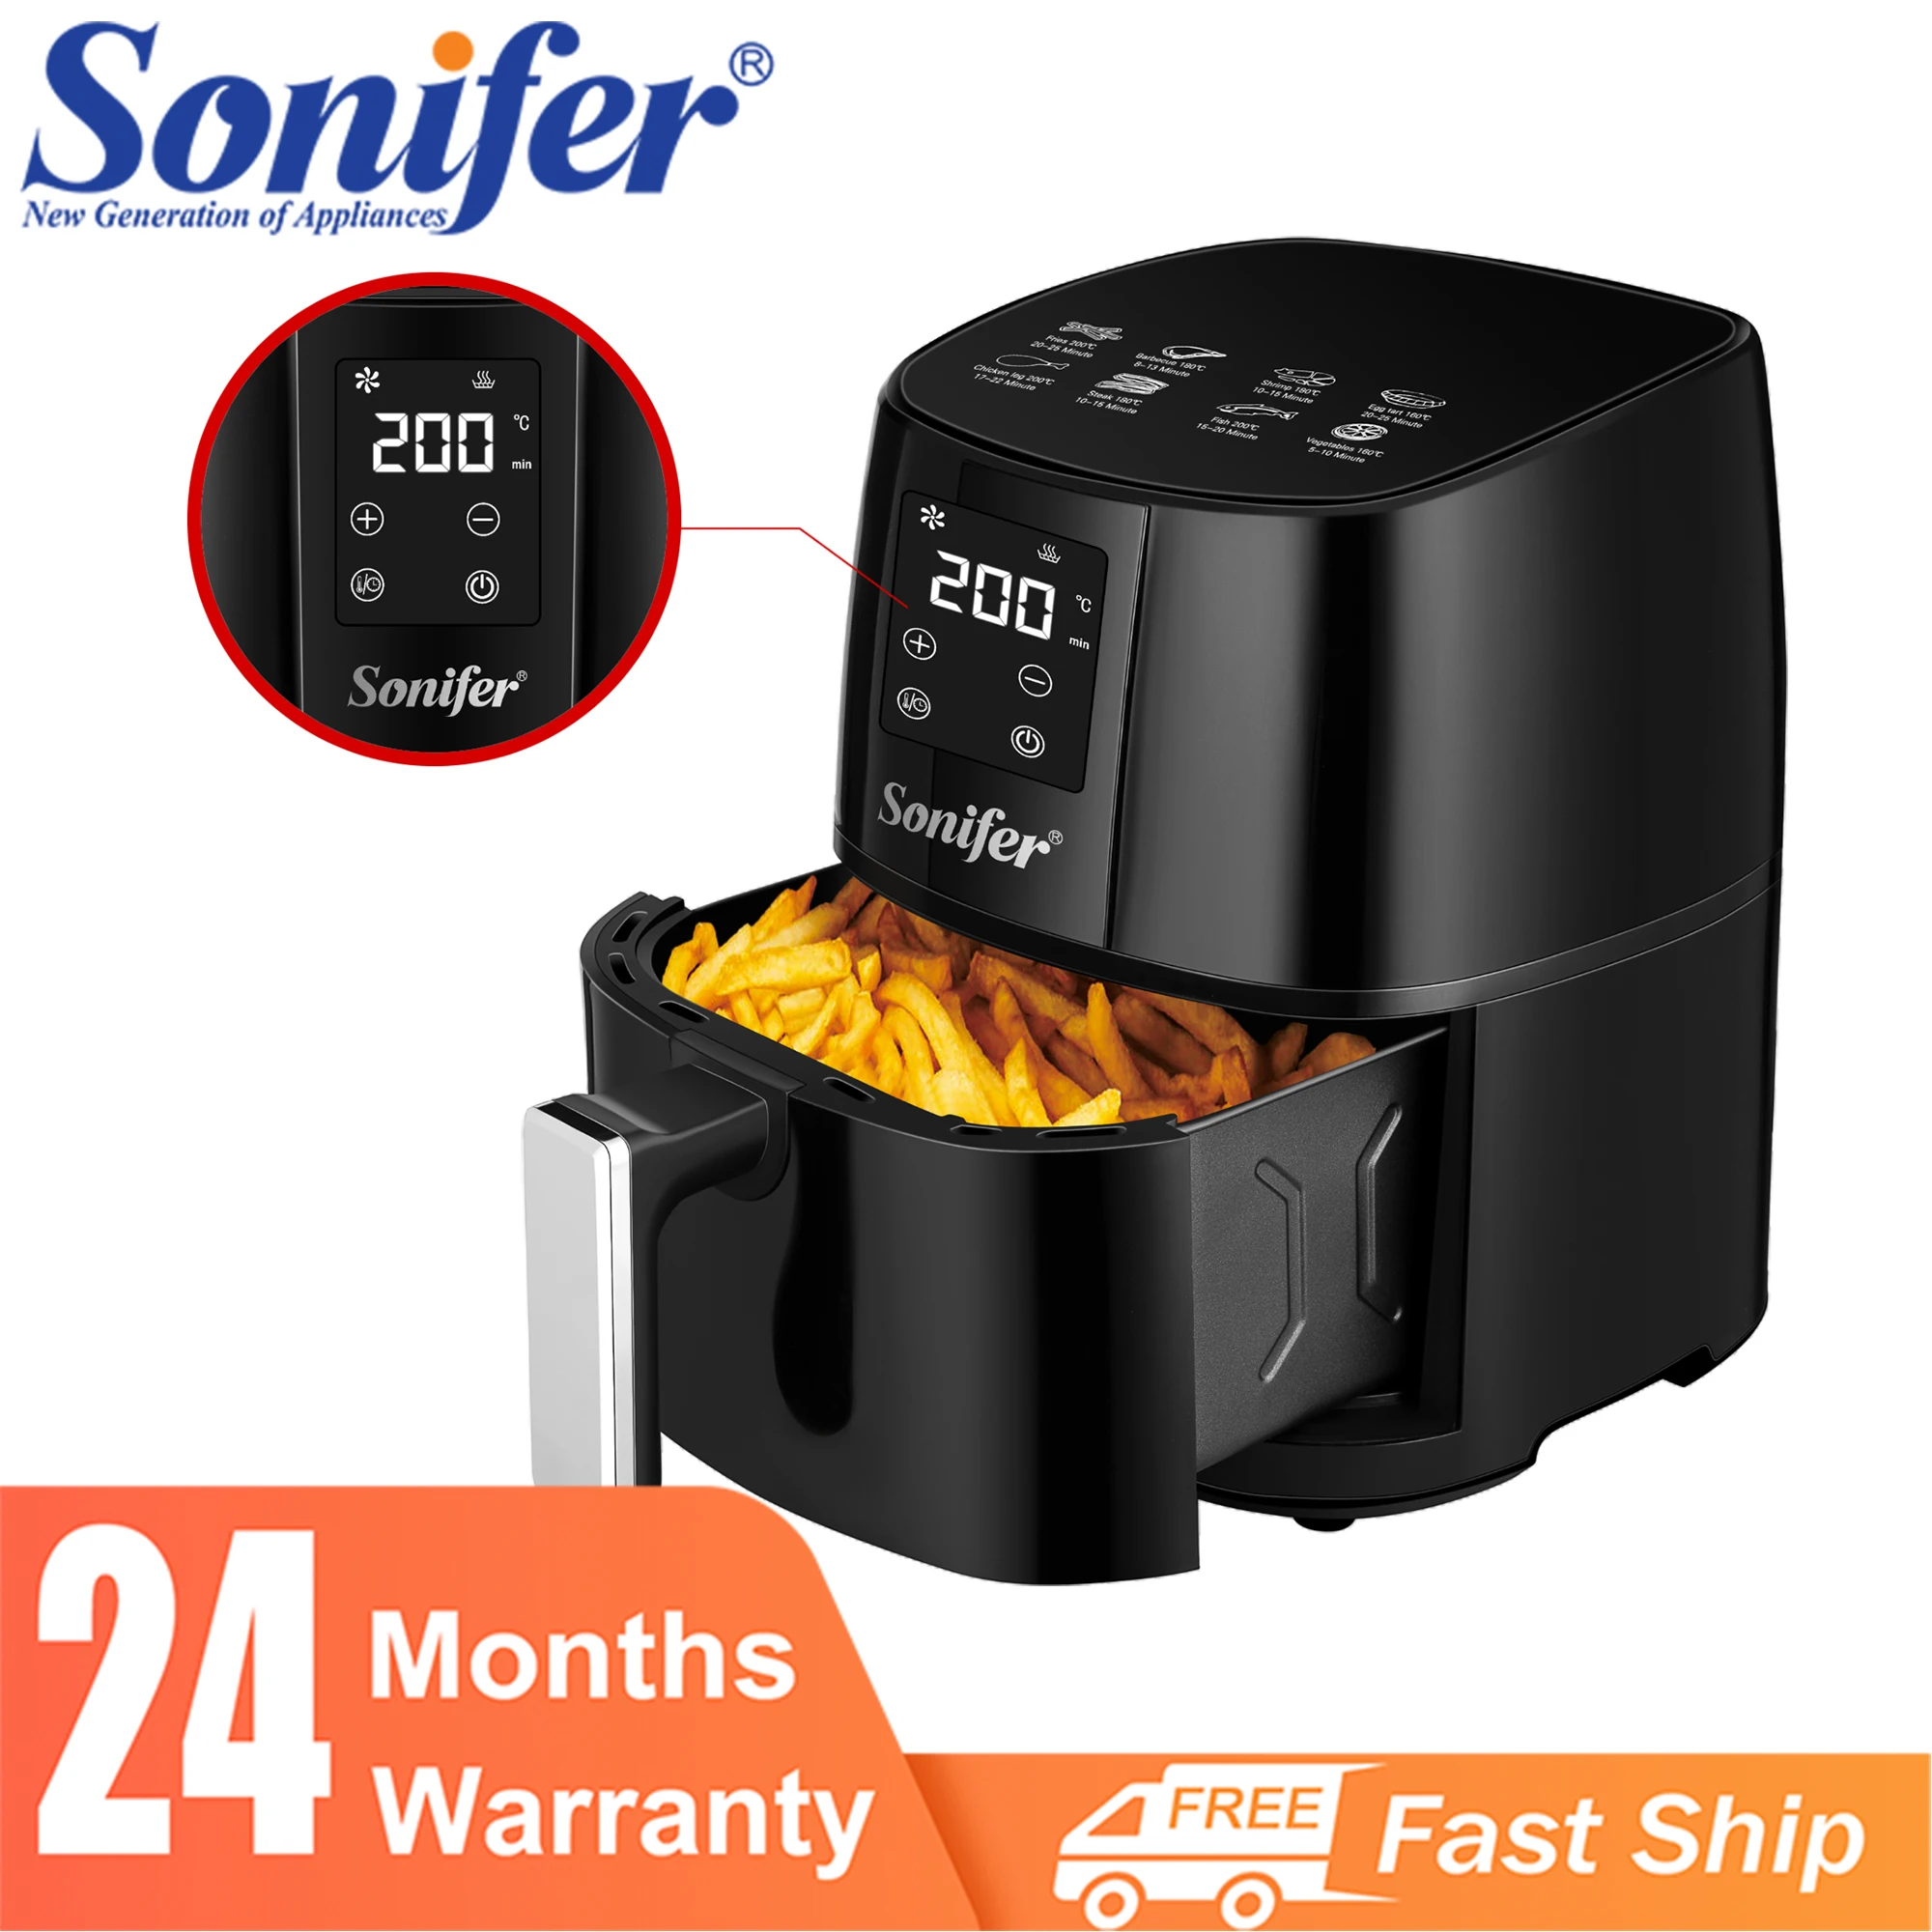 Sonifer 4.2L Air Fryer Without Oil Oven 360°Baking LED Touchscreen Electric Deep Fryer 1400W Nonstick Basket Kitchen Cooking Fry 1